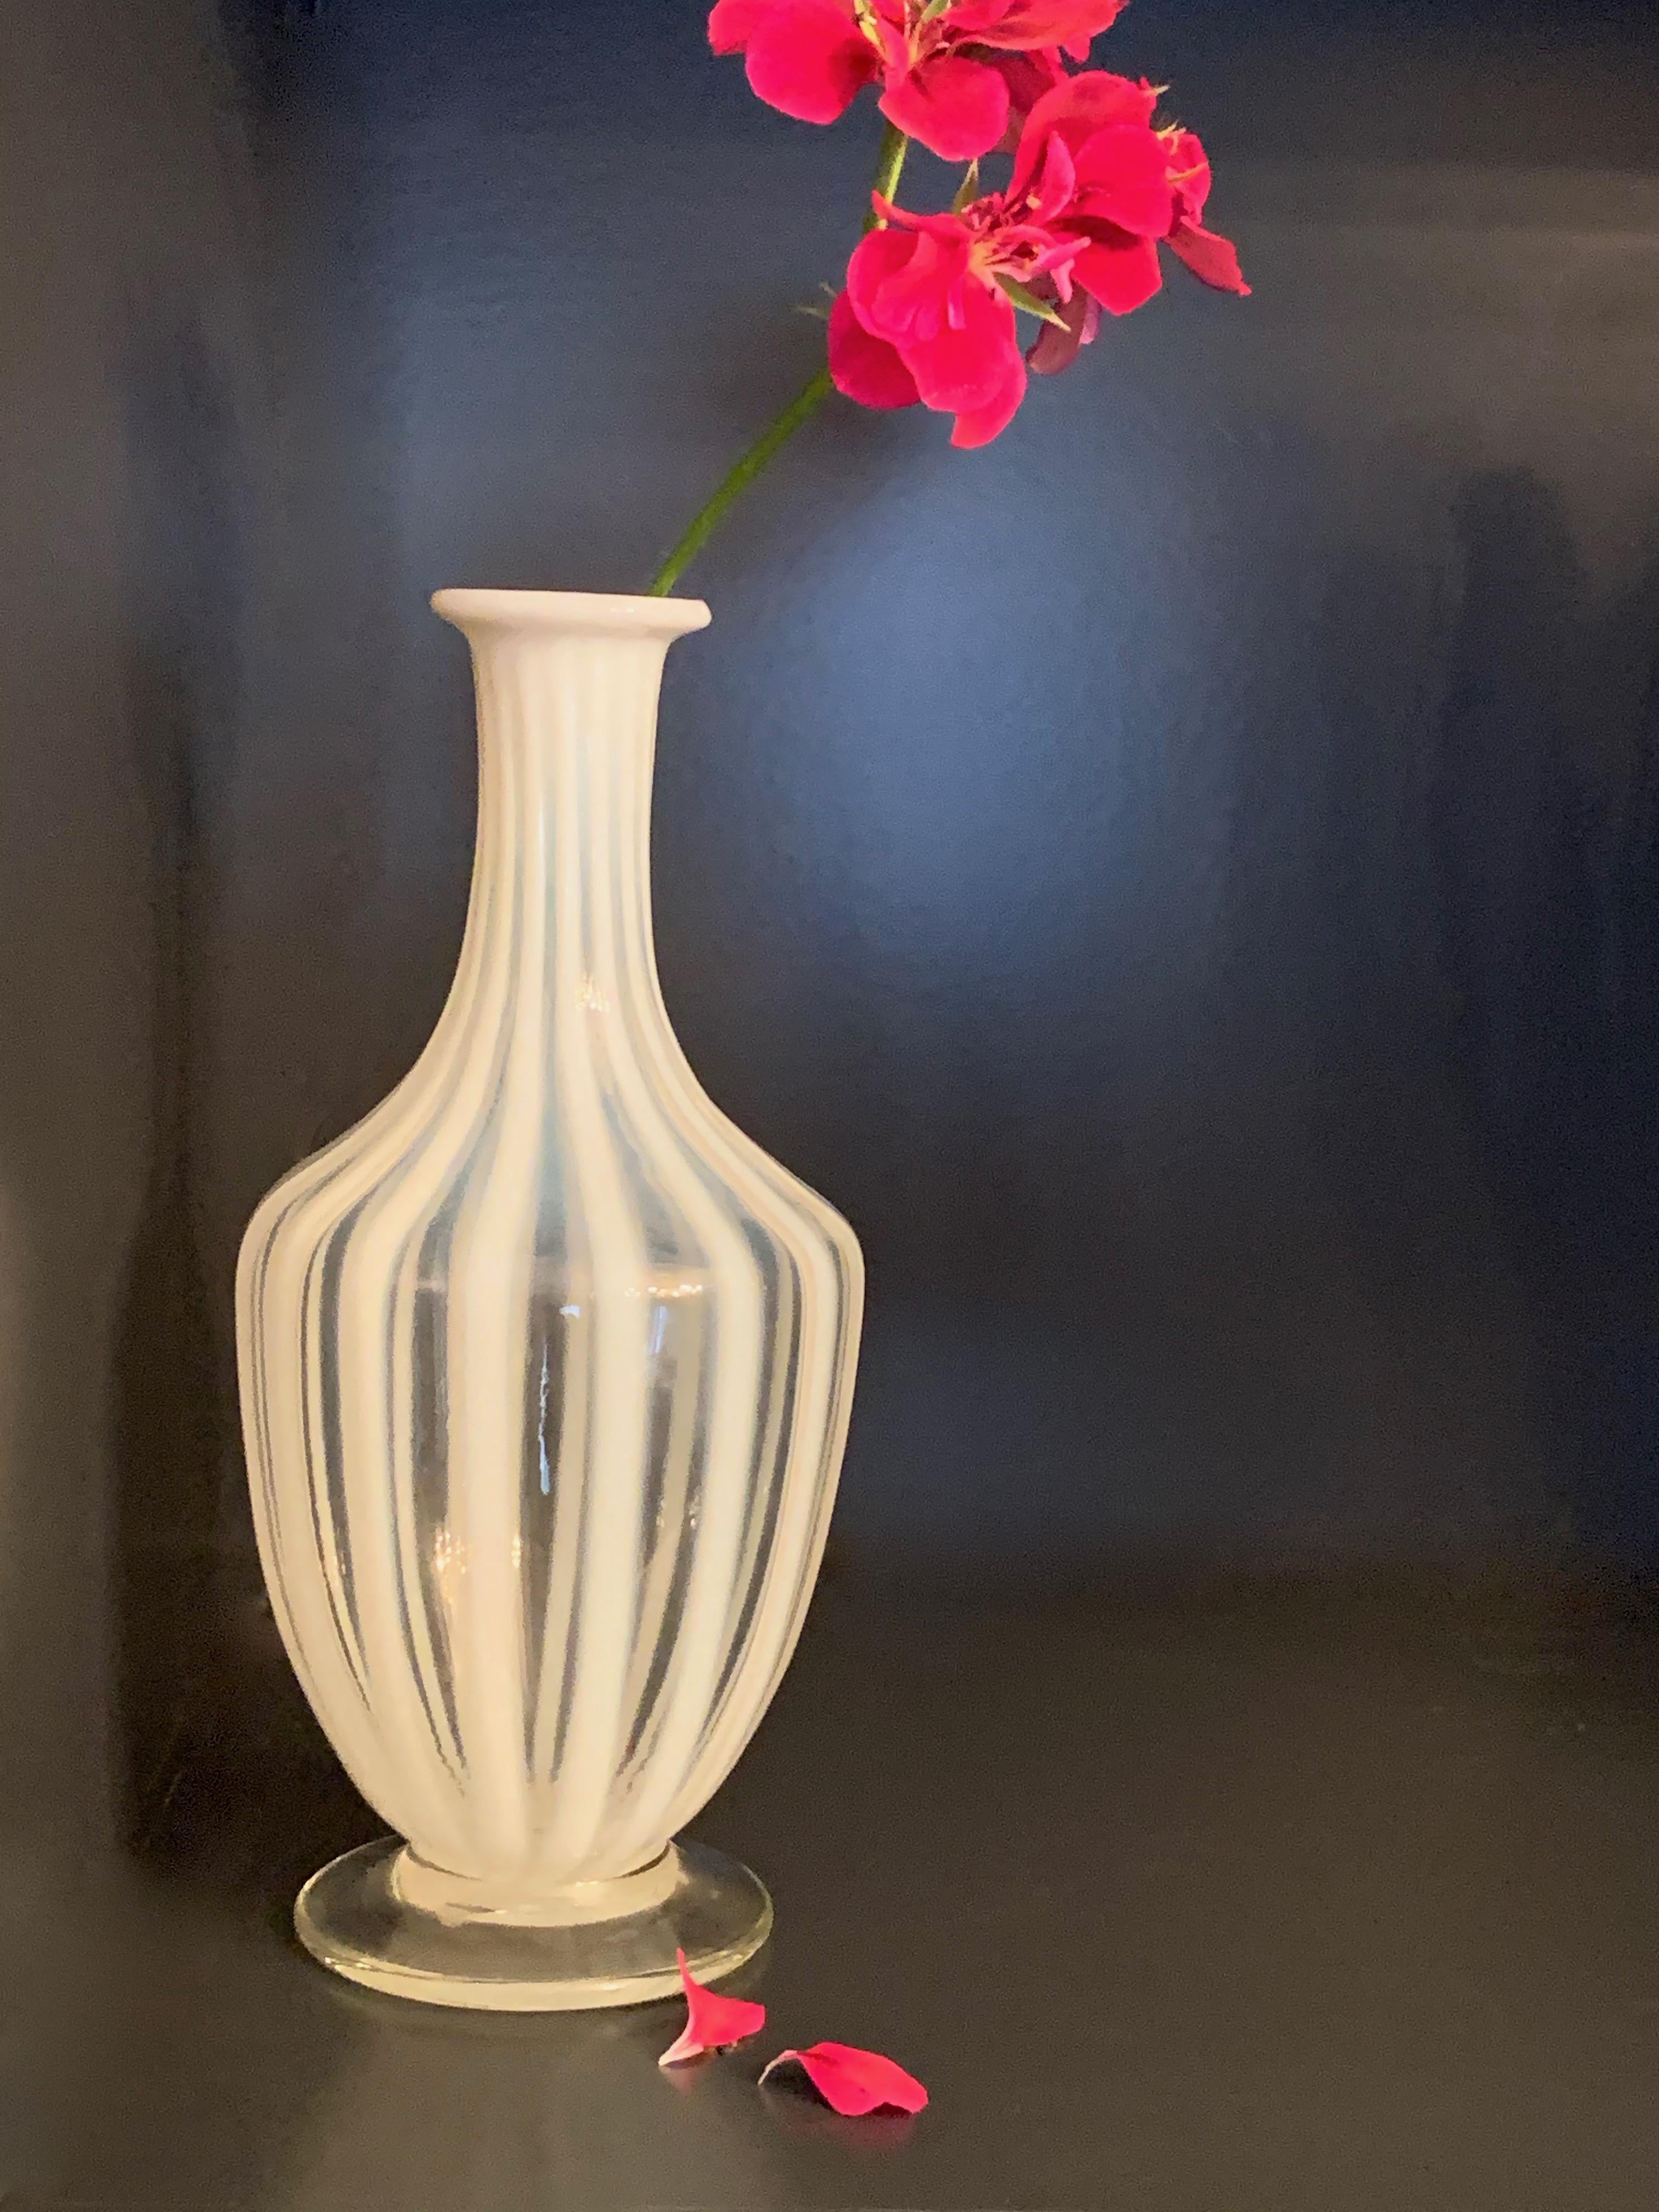 A Classic design bud vase of Murano glass Italy. A wonderful addition to any table or shelf, and perfectly decorative without a flower in sight